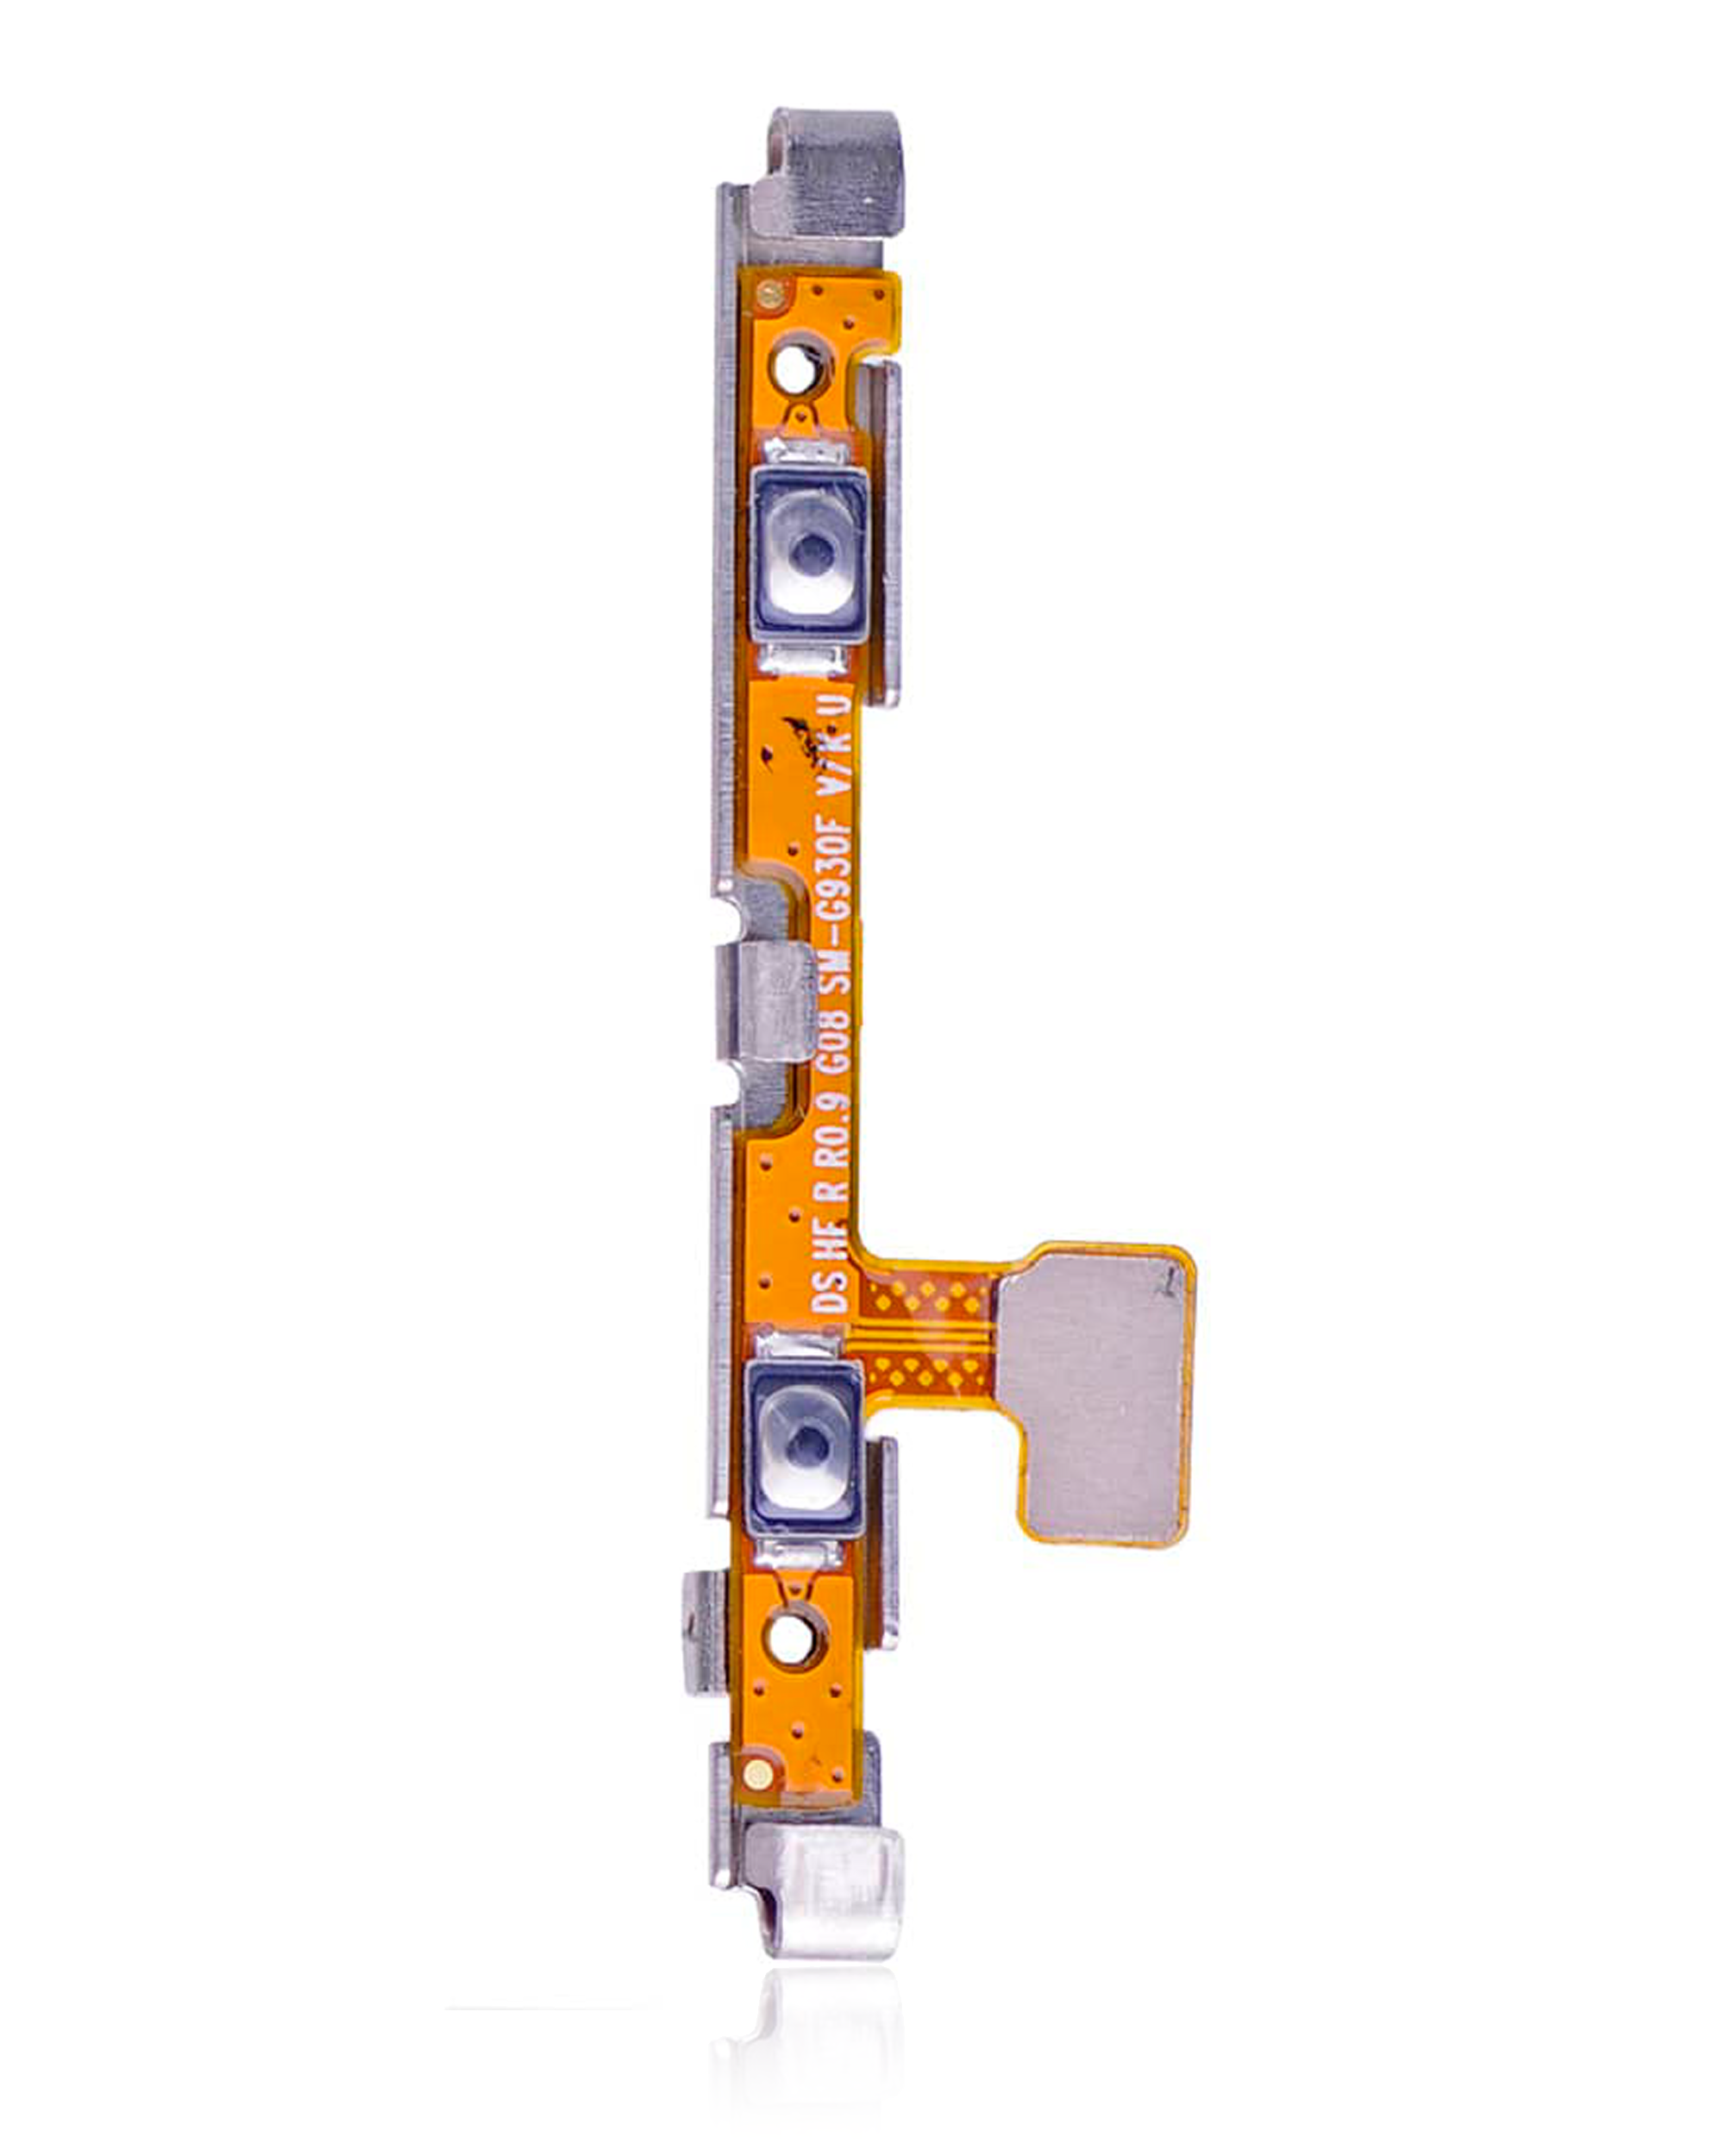 For Samsung Galaxy S7 Volume Button Flex Cable Replacement